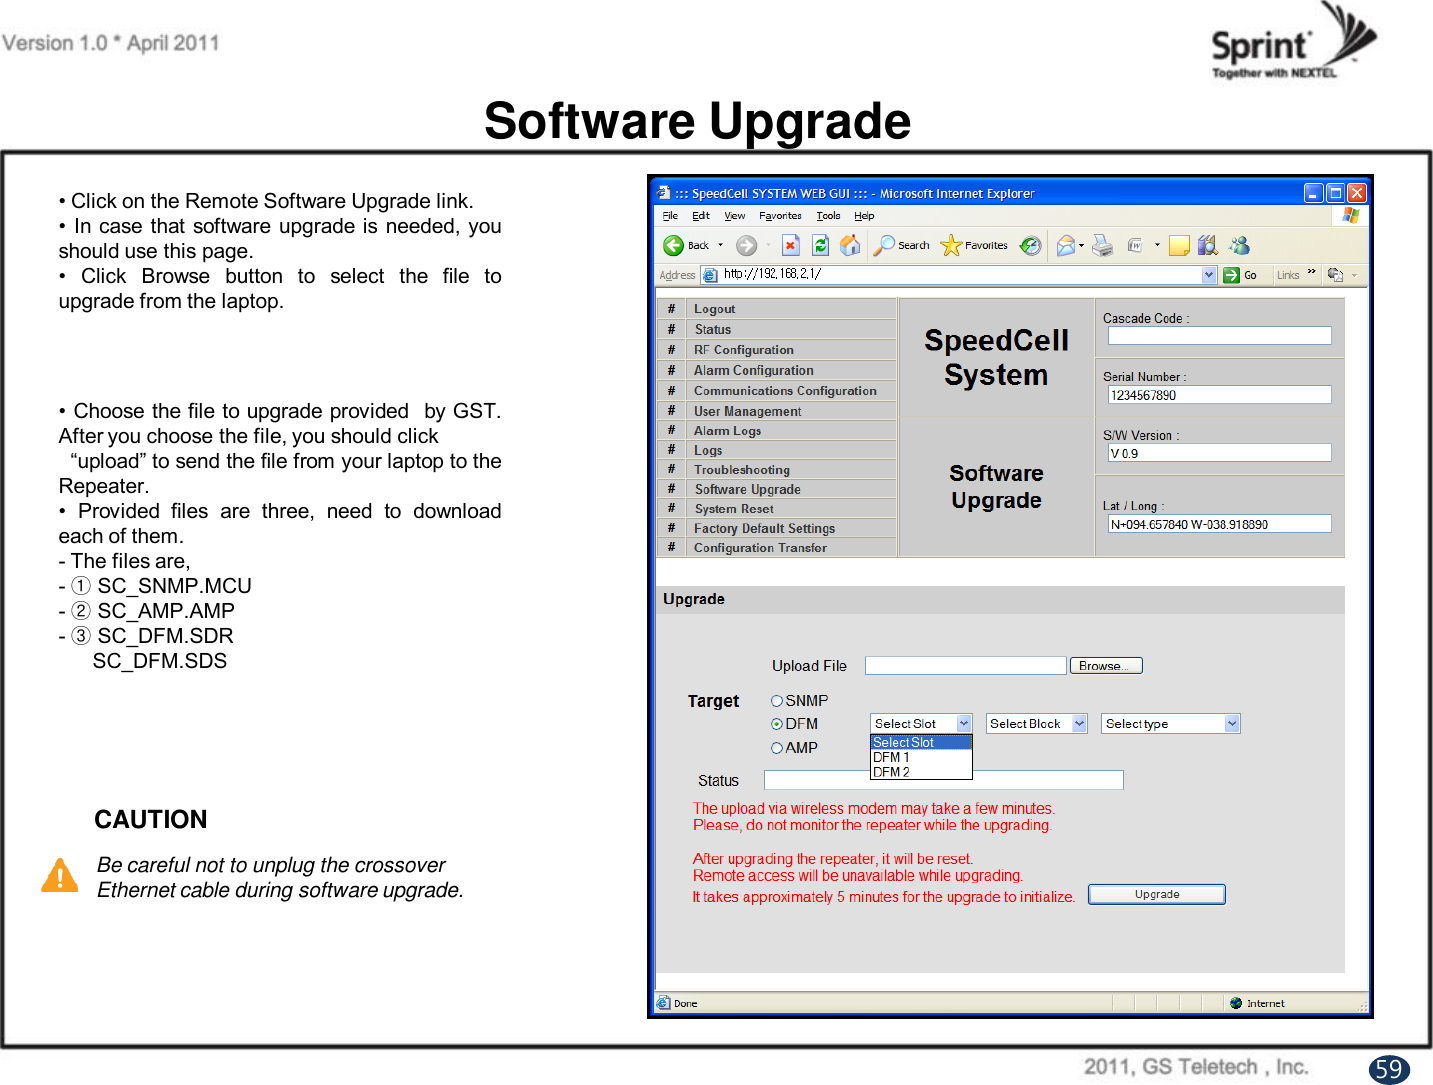 Software Upgrade• Click on the Remote Software Upgrade link.•In case that software upgrade is needed, youshould use this page.• Click Browse button to select the file toupgrade from the laptop.• Choose the file to upgrade provided by GST.After you choose the file, you should click“upload” to send the file from your laptop to theRepeater.• Provided files are three, need to downloadeach of them.- The files are,-①SC_SNMP.MCU-②SC_AMP.AMP-③SC_DFM.SDRSC_DFM.SDSCAUTIONBe careful not to unplug the crossover Ethernet cable during software upgrade.59